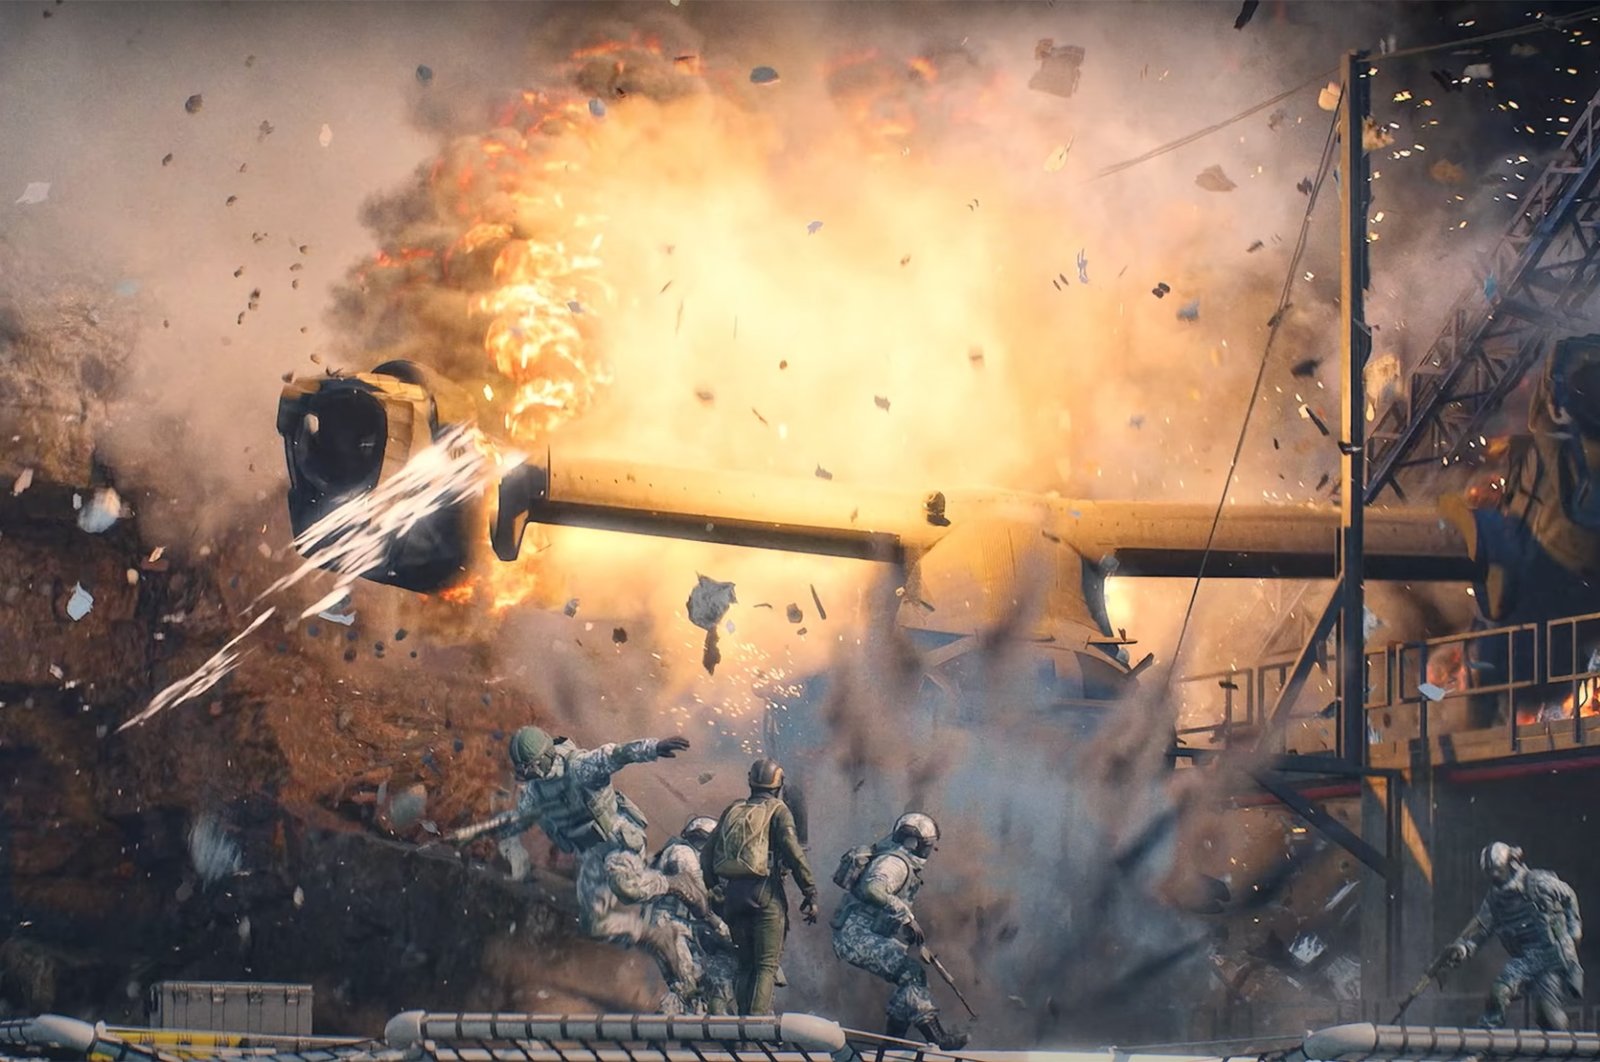 A screenshot from the official reveal trailer of “Battlefield 2042.” (From YouTube / @Battlefield)